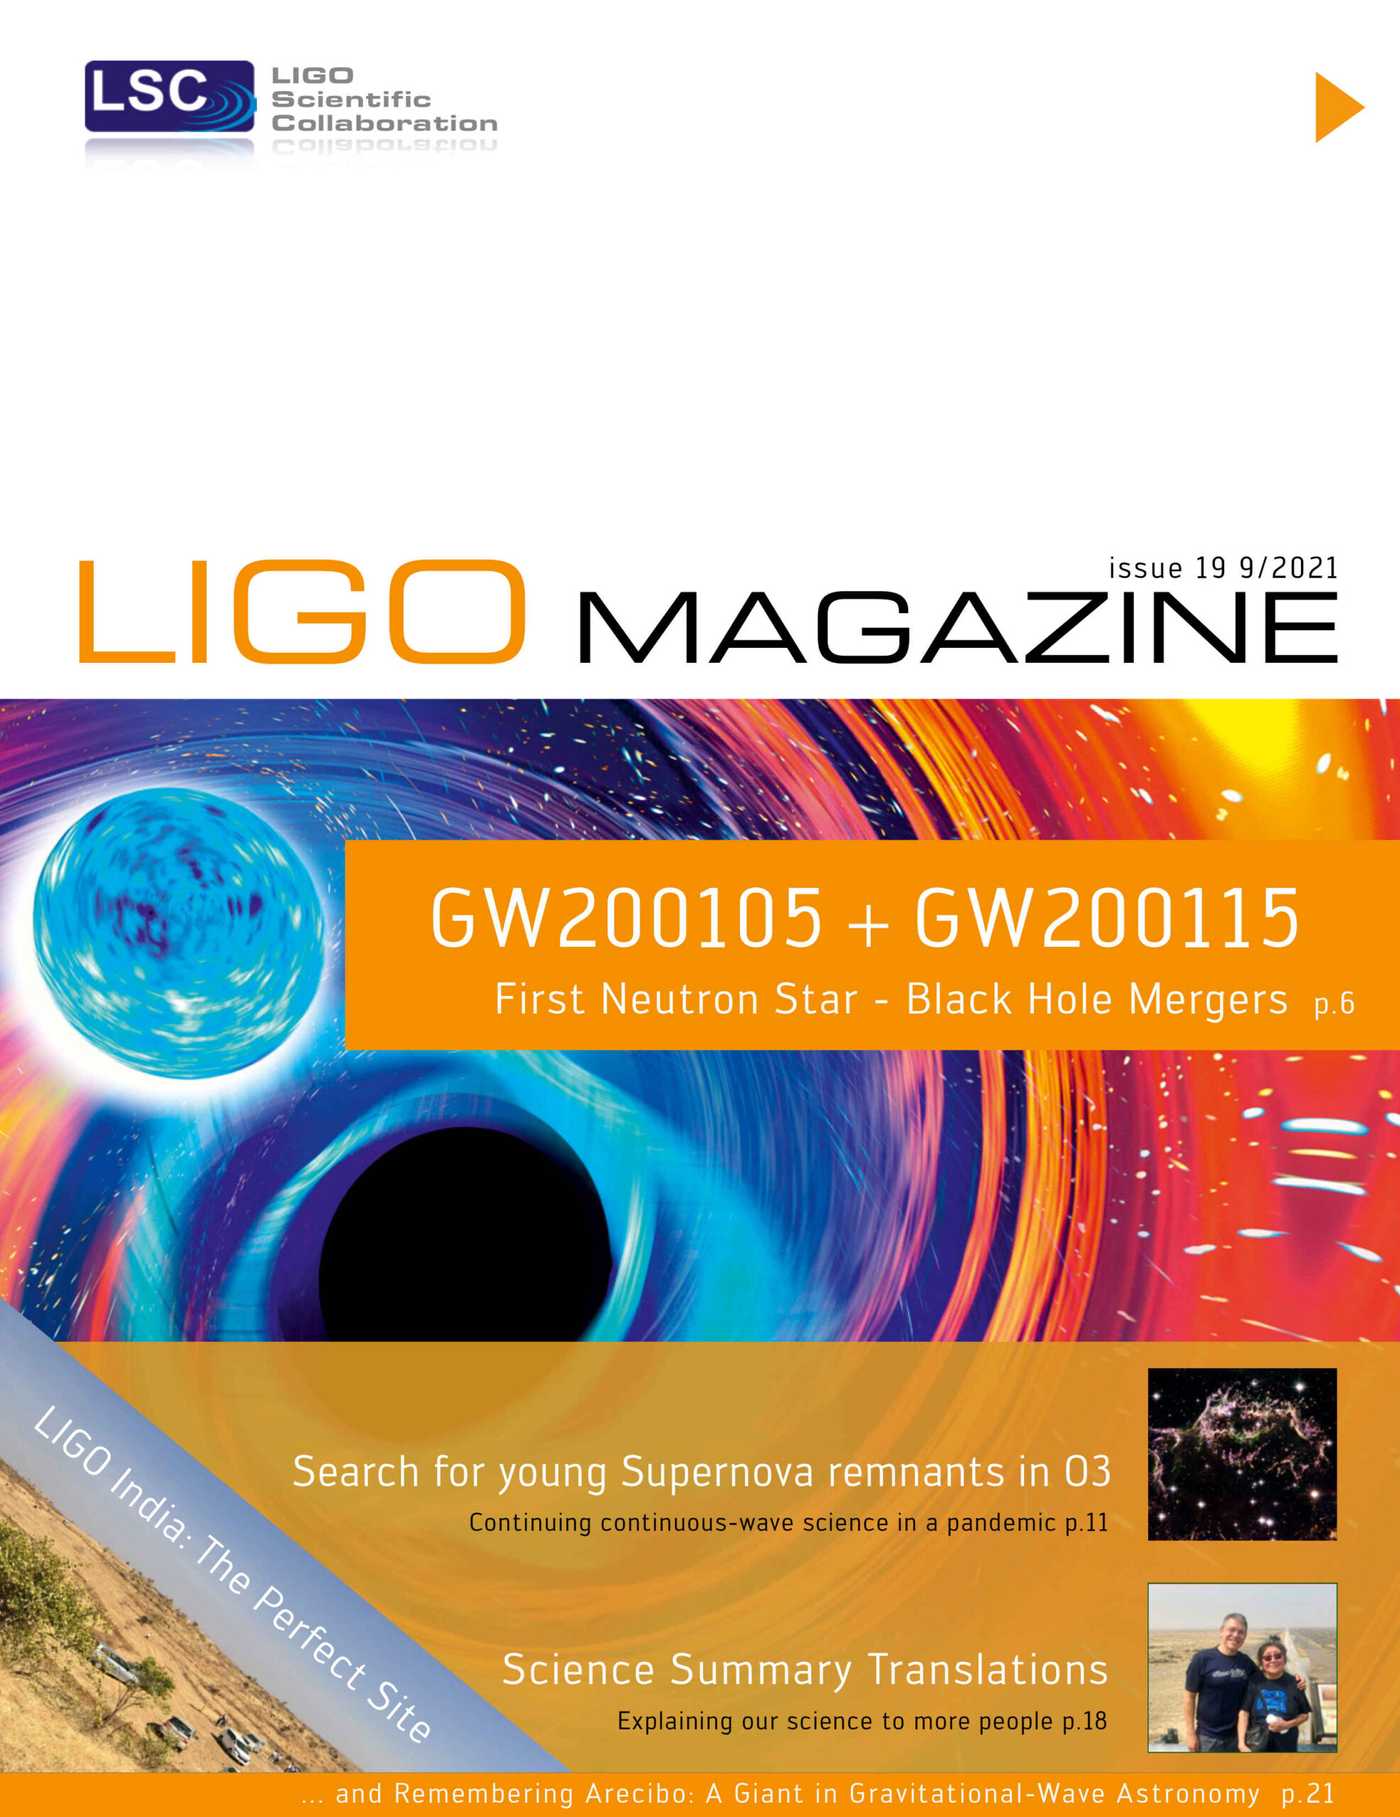 News-Image 50 of: New LIGO Magazine Issue 19 is out